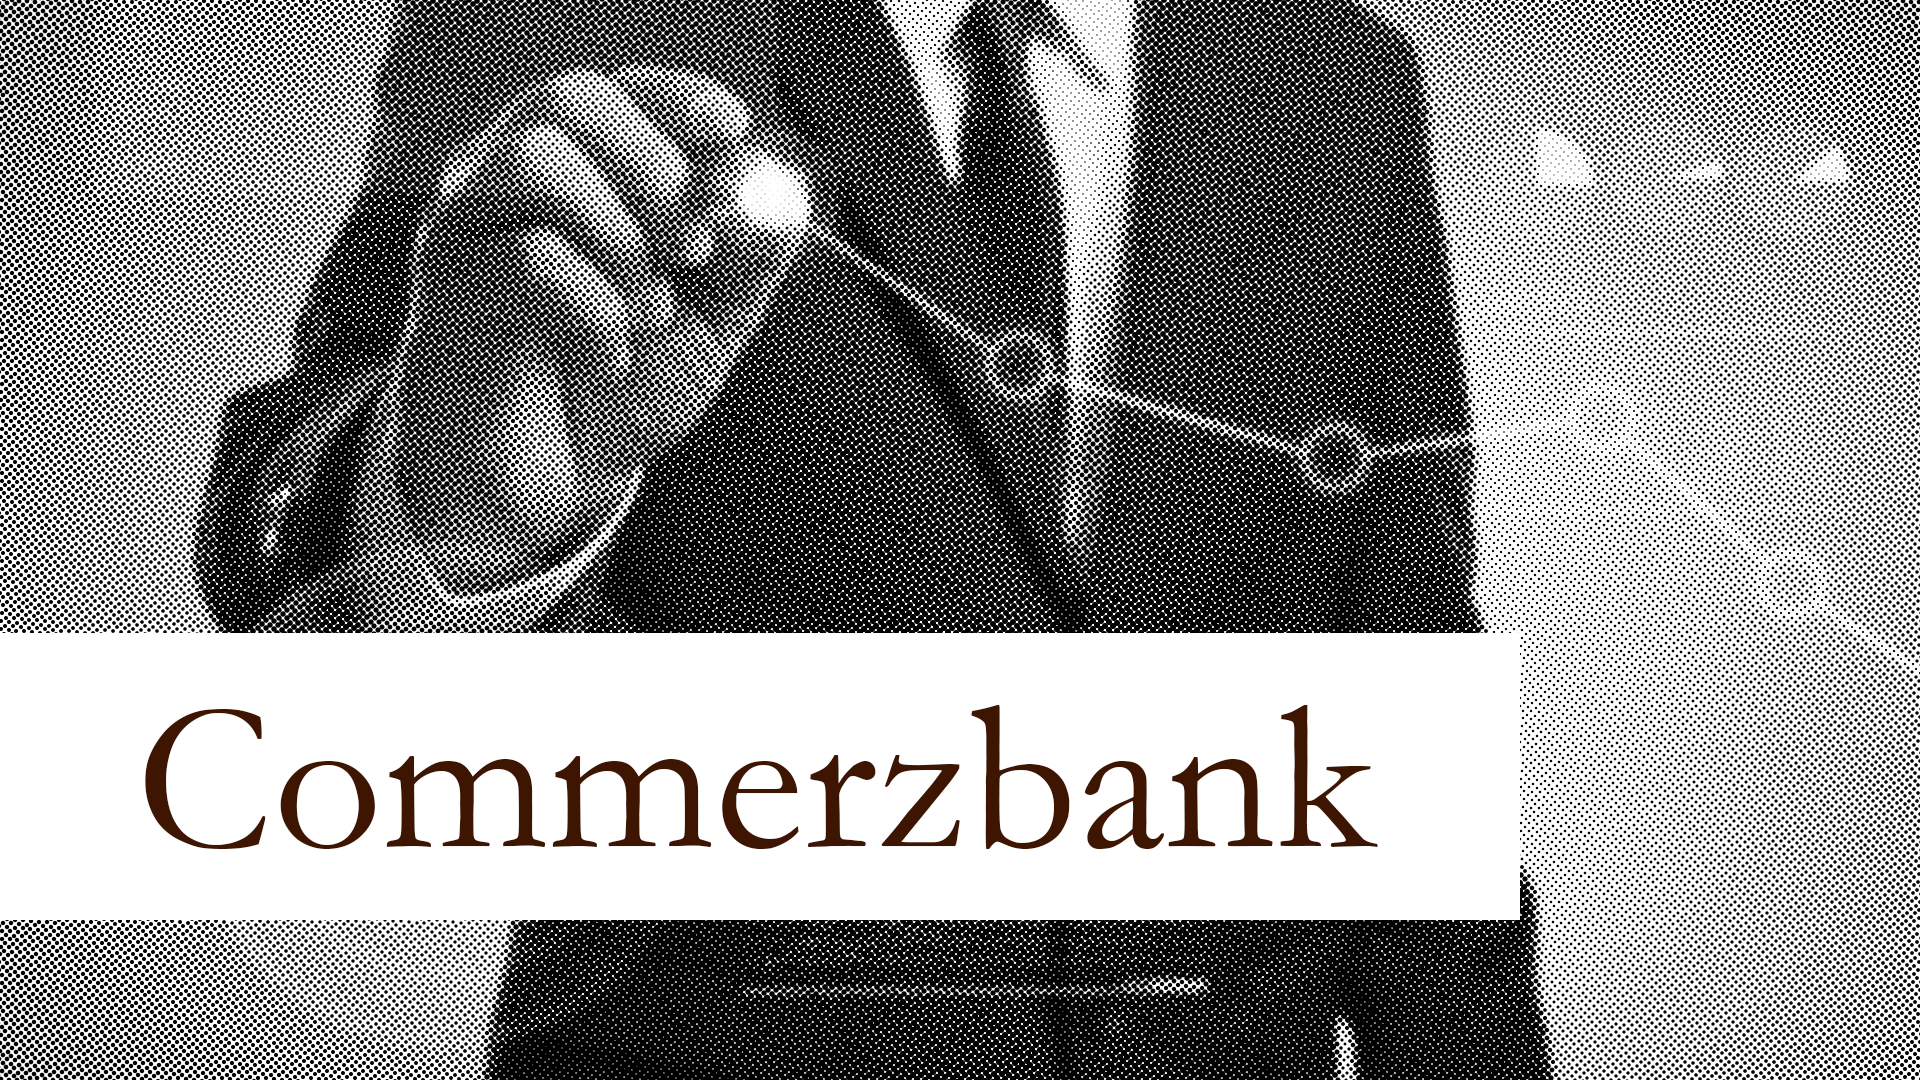 Restructured and performing well: Commerzbank